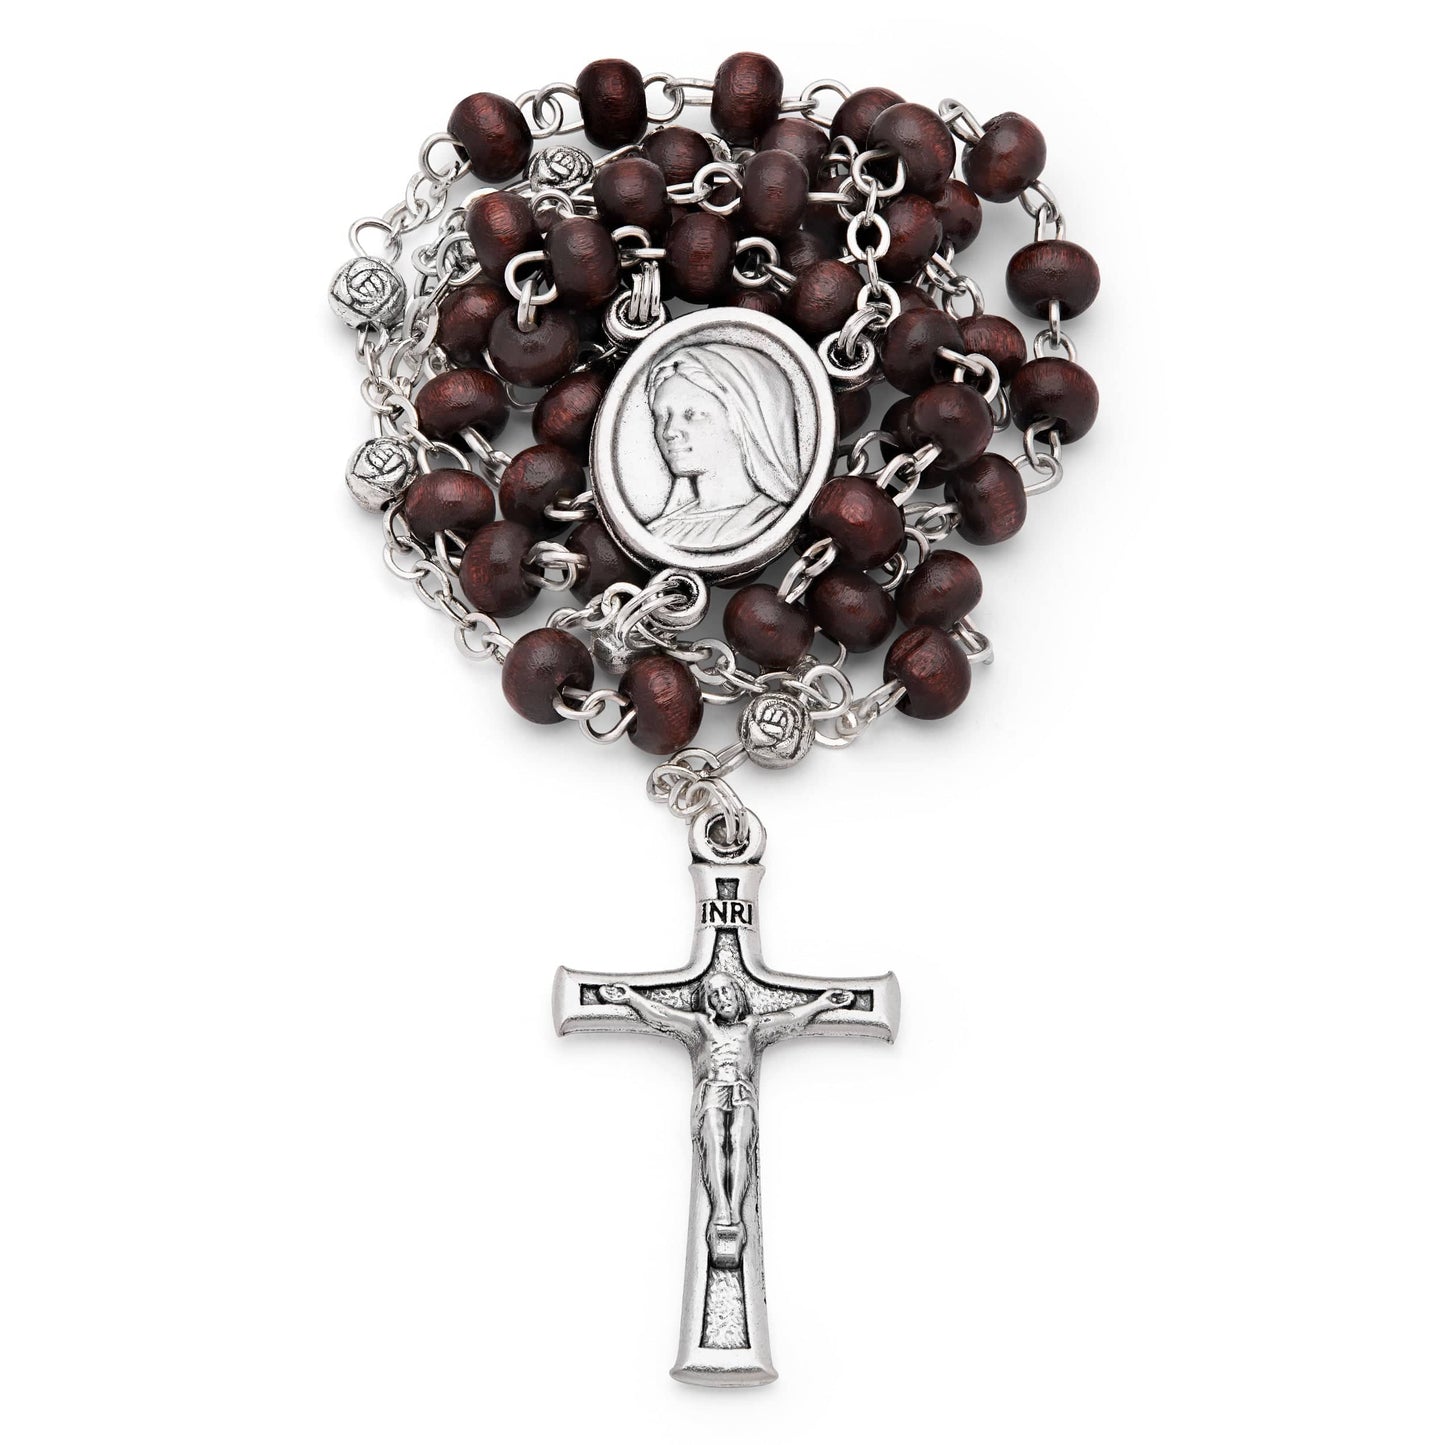 MONDO CATTOLICO Prayer Beads 38 cm (15 in) / 4 mm (0.15 in) Divine Mercy Keepsake Wooden Case and Rosary